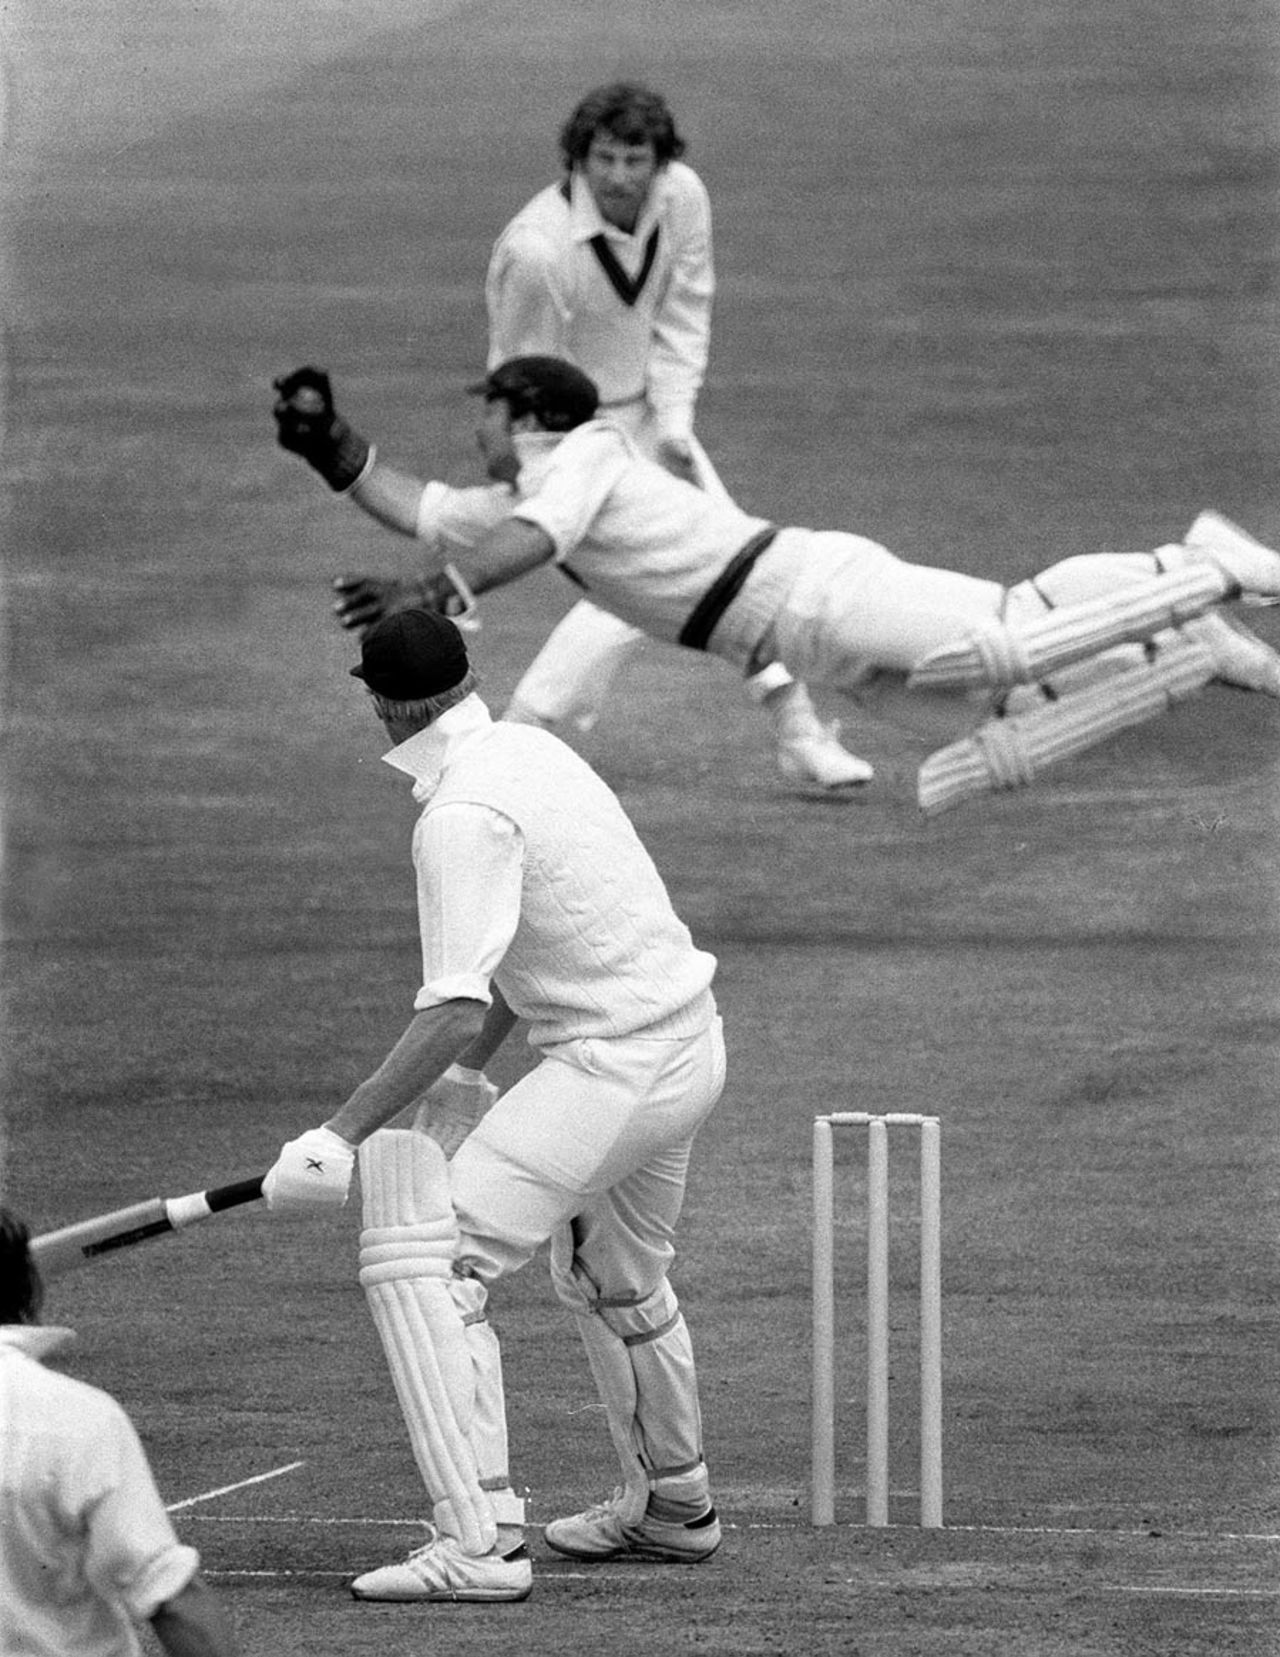 An acrobatic catch from Rodney Marsh to dismiss Tony Greig, England v Australia, World Cup semi-final, Leeds, June 18, 1975